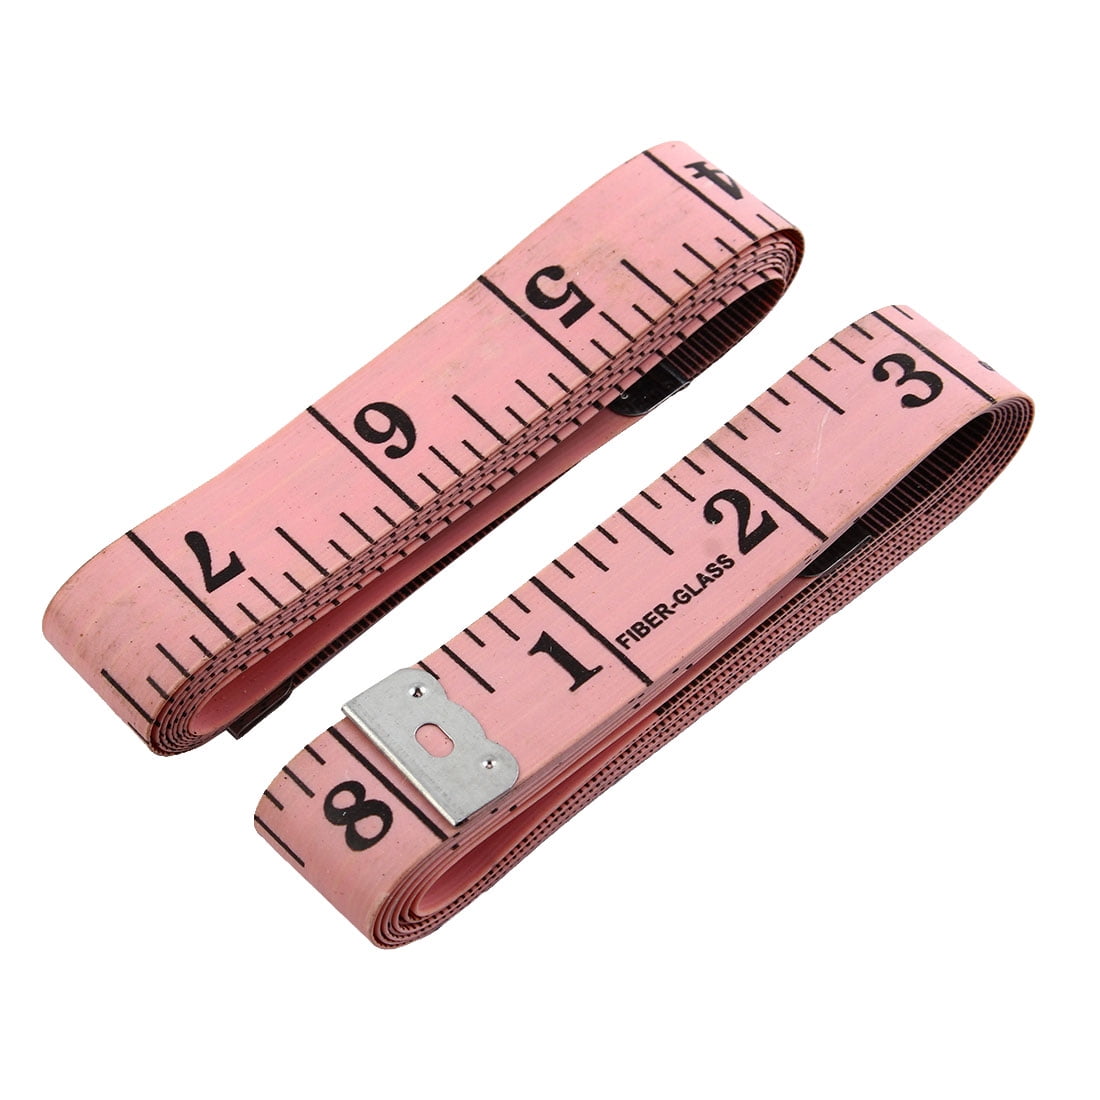 Cute 1.5M double side measurement Ruler tape body measuring Cloth Diet Sew Girl 